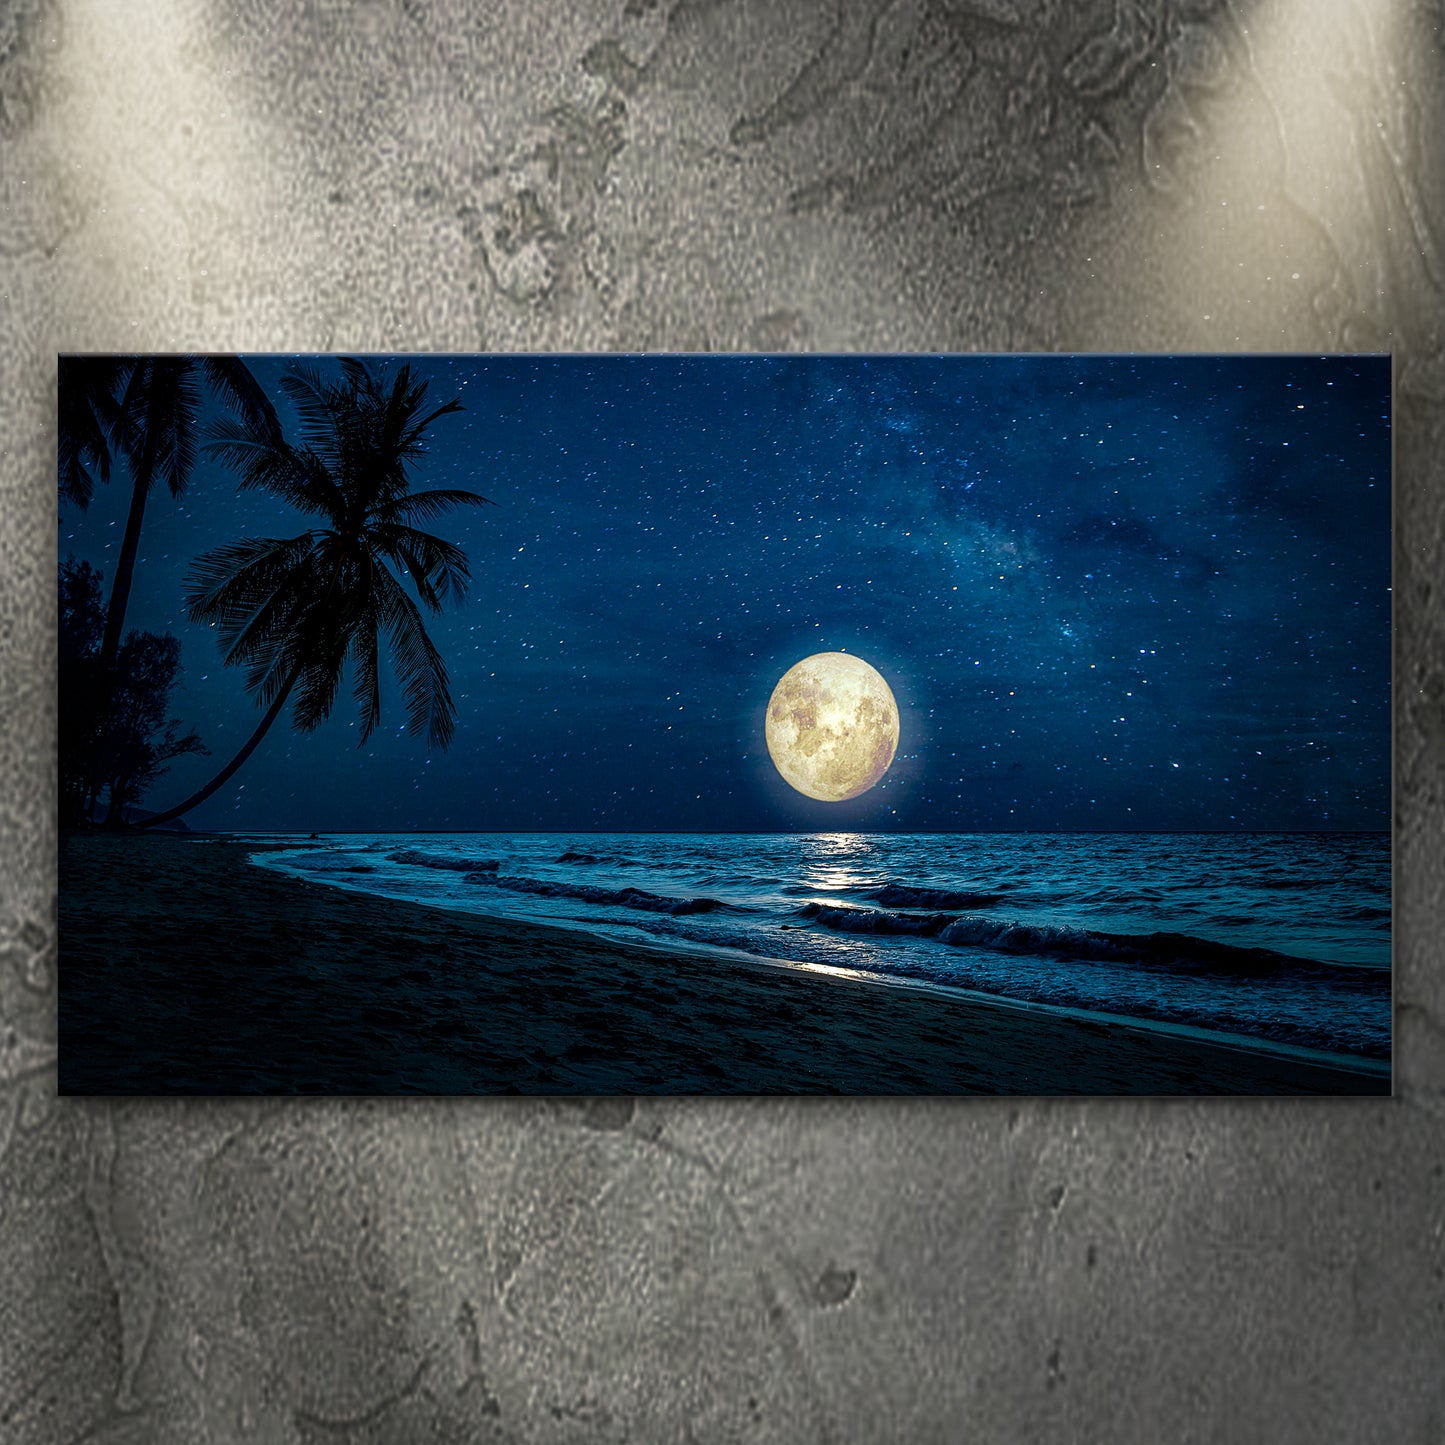 Moonlight Shines At The Beach Canvas Wall Art - Image by Tailored Canvases